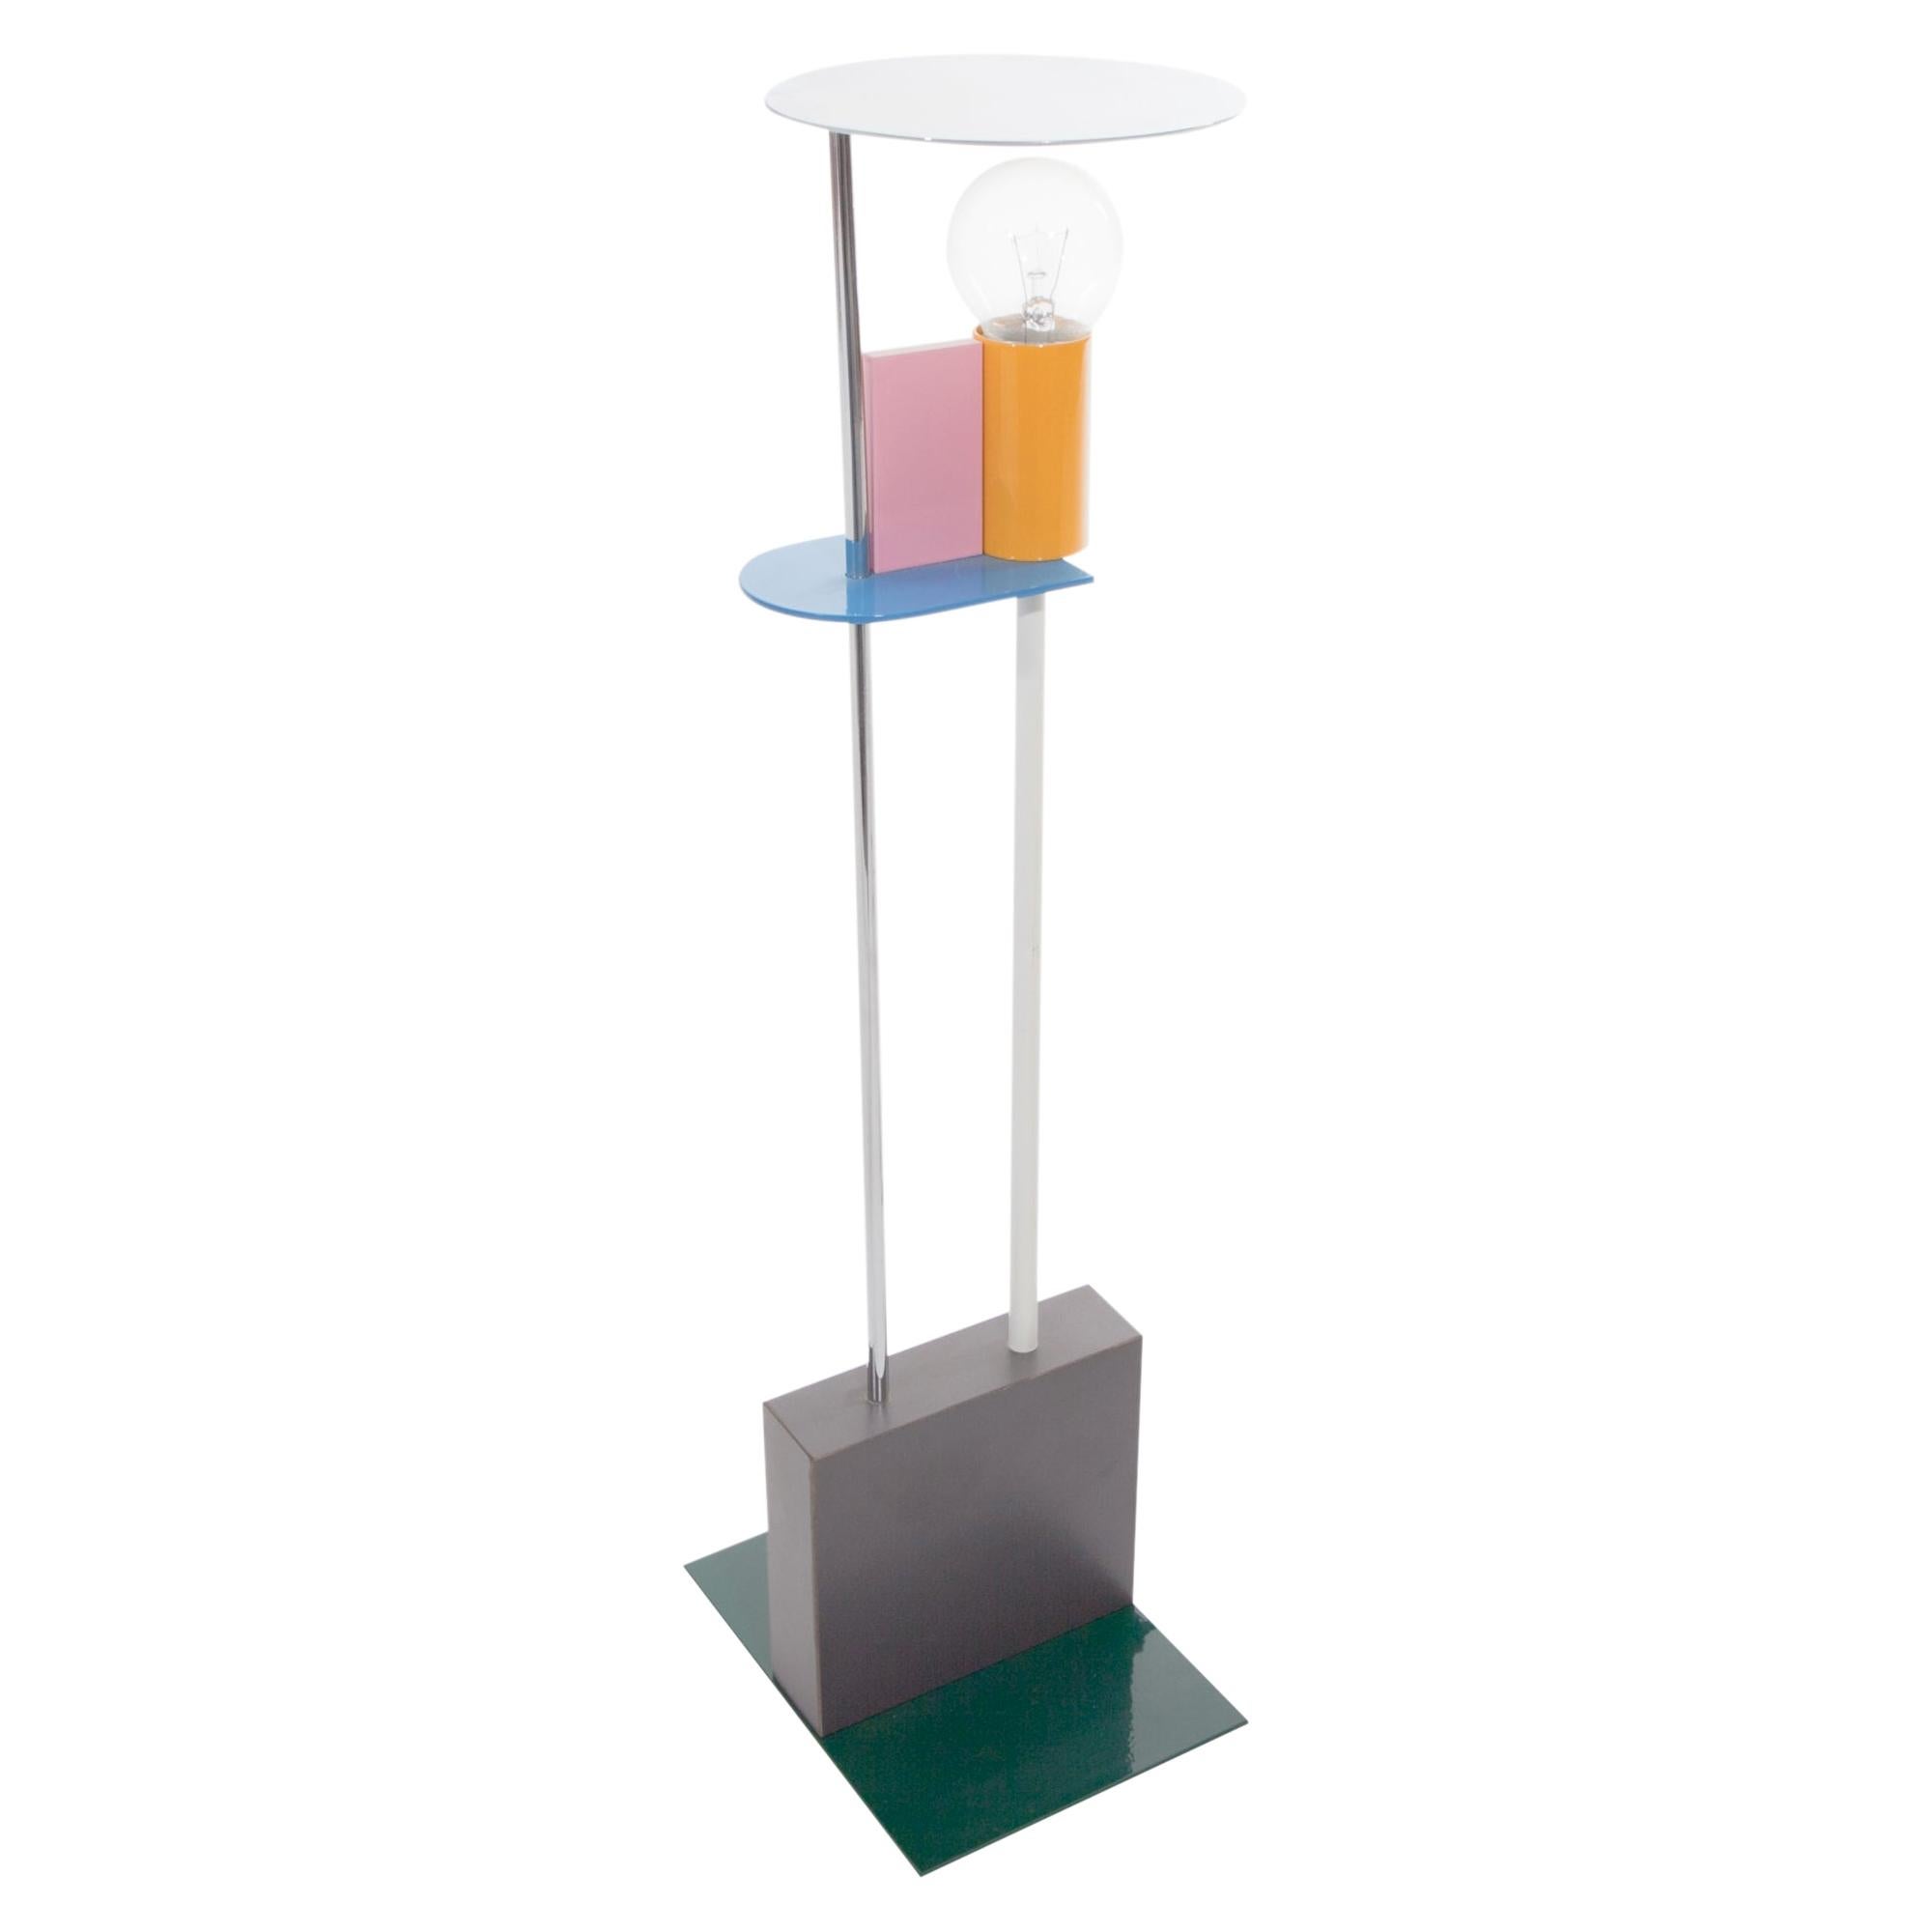 Piccadilly Table Lamp USA 110 Volts, by Gerard Taylor for Memphis Milano Collect